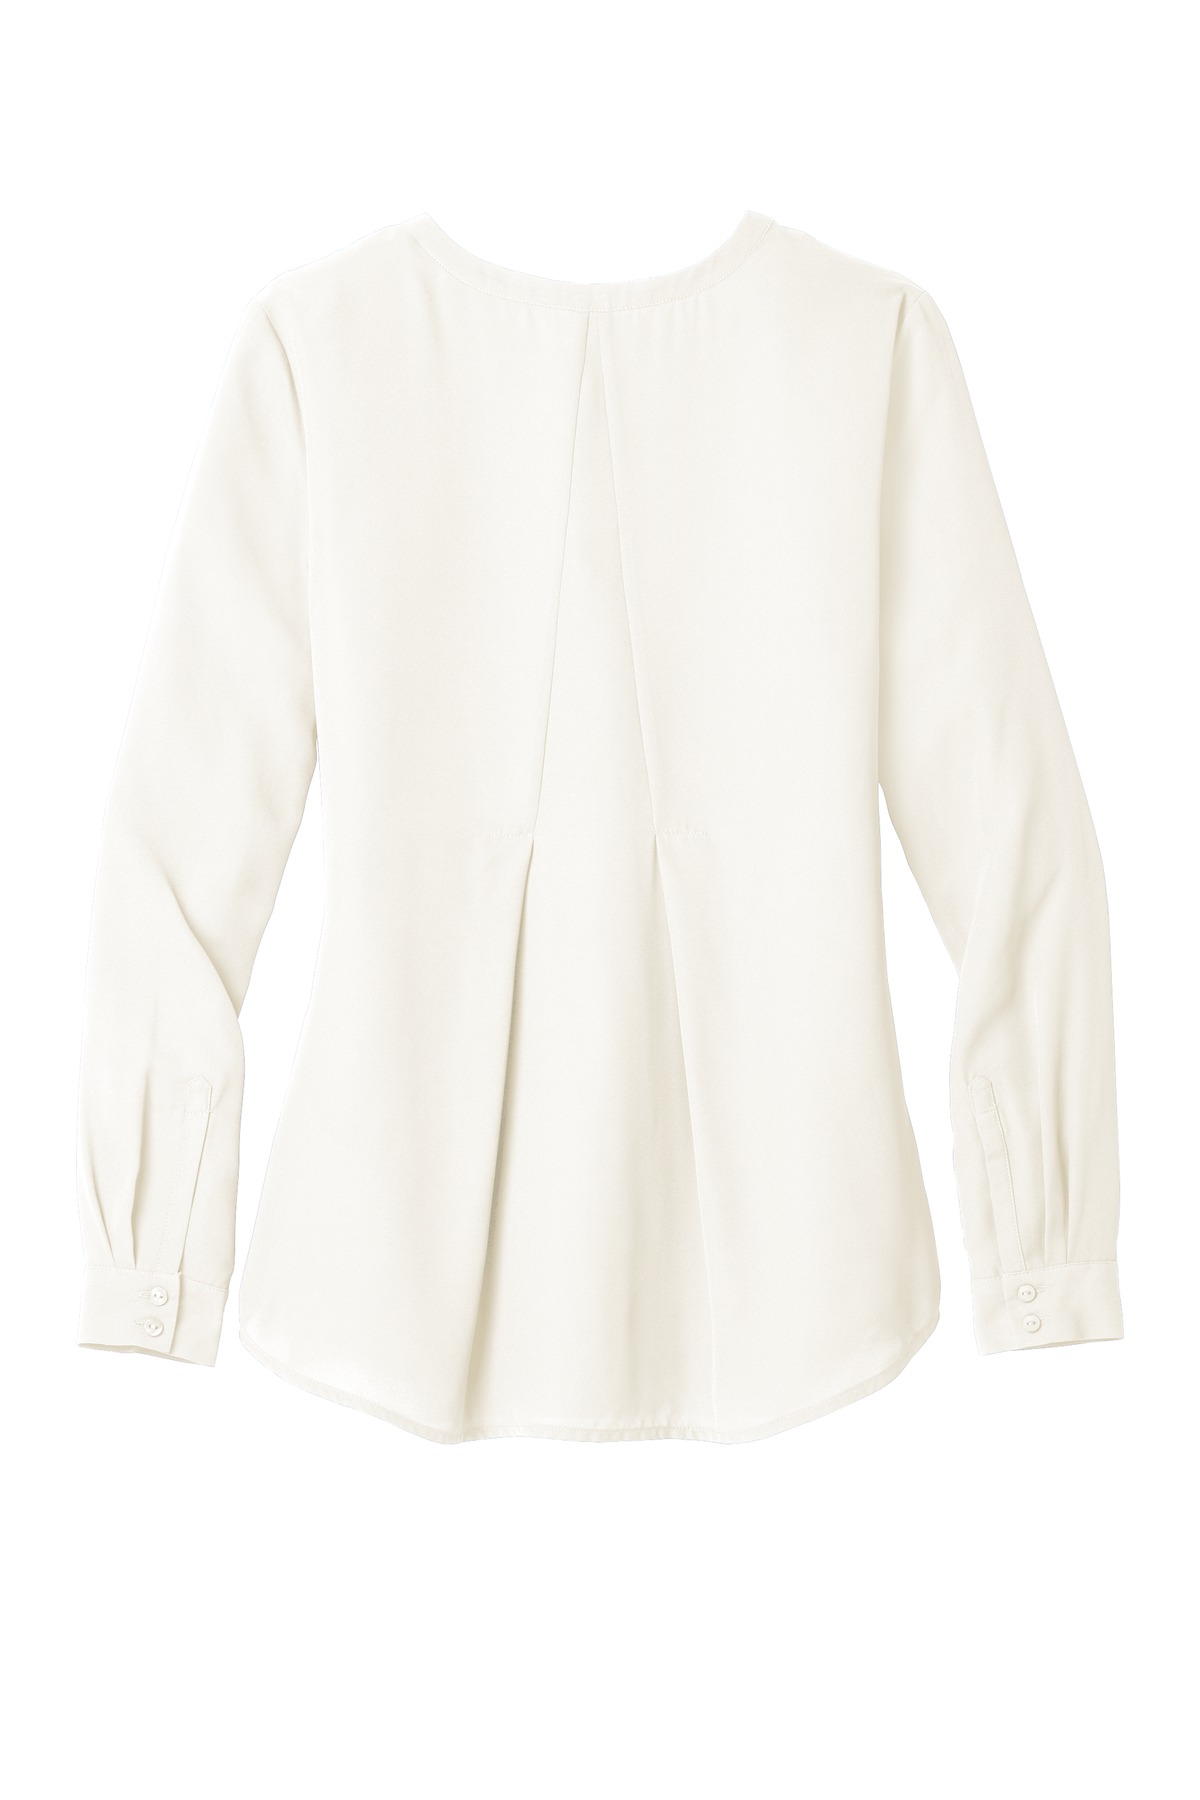 Port Authority Women's Long Sleeve Button-Front Blouse. LW700 - image 4 of 4